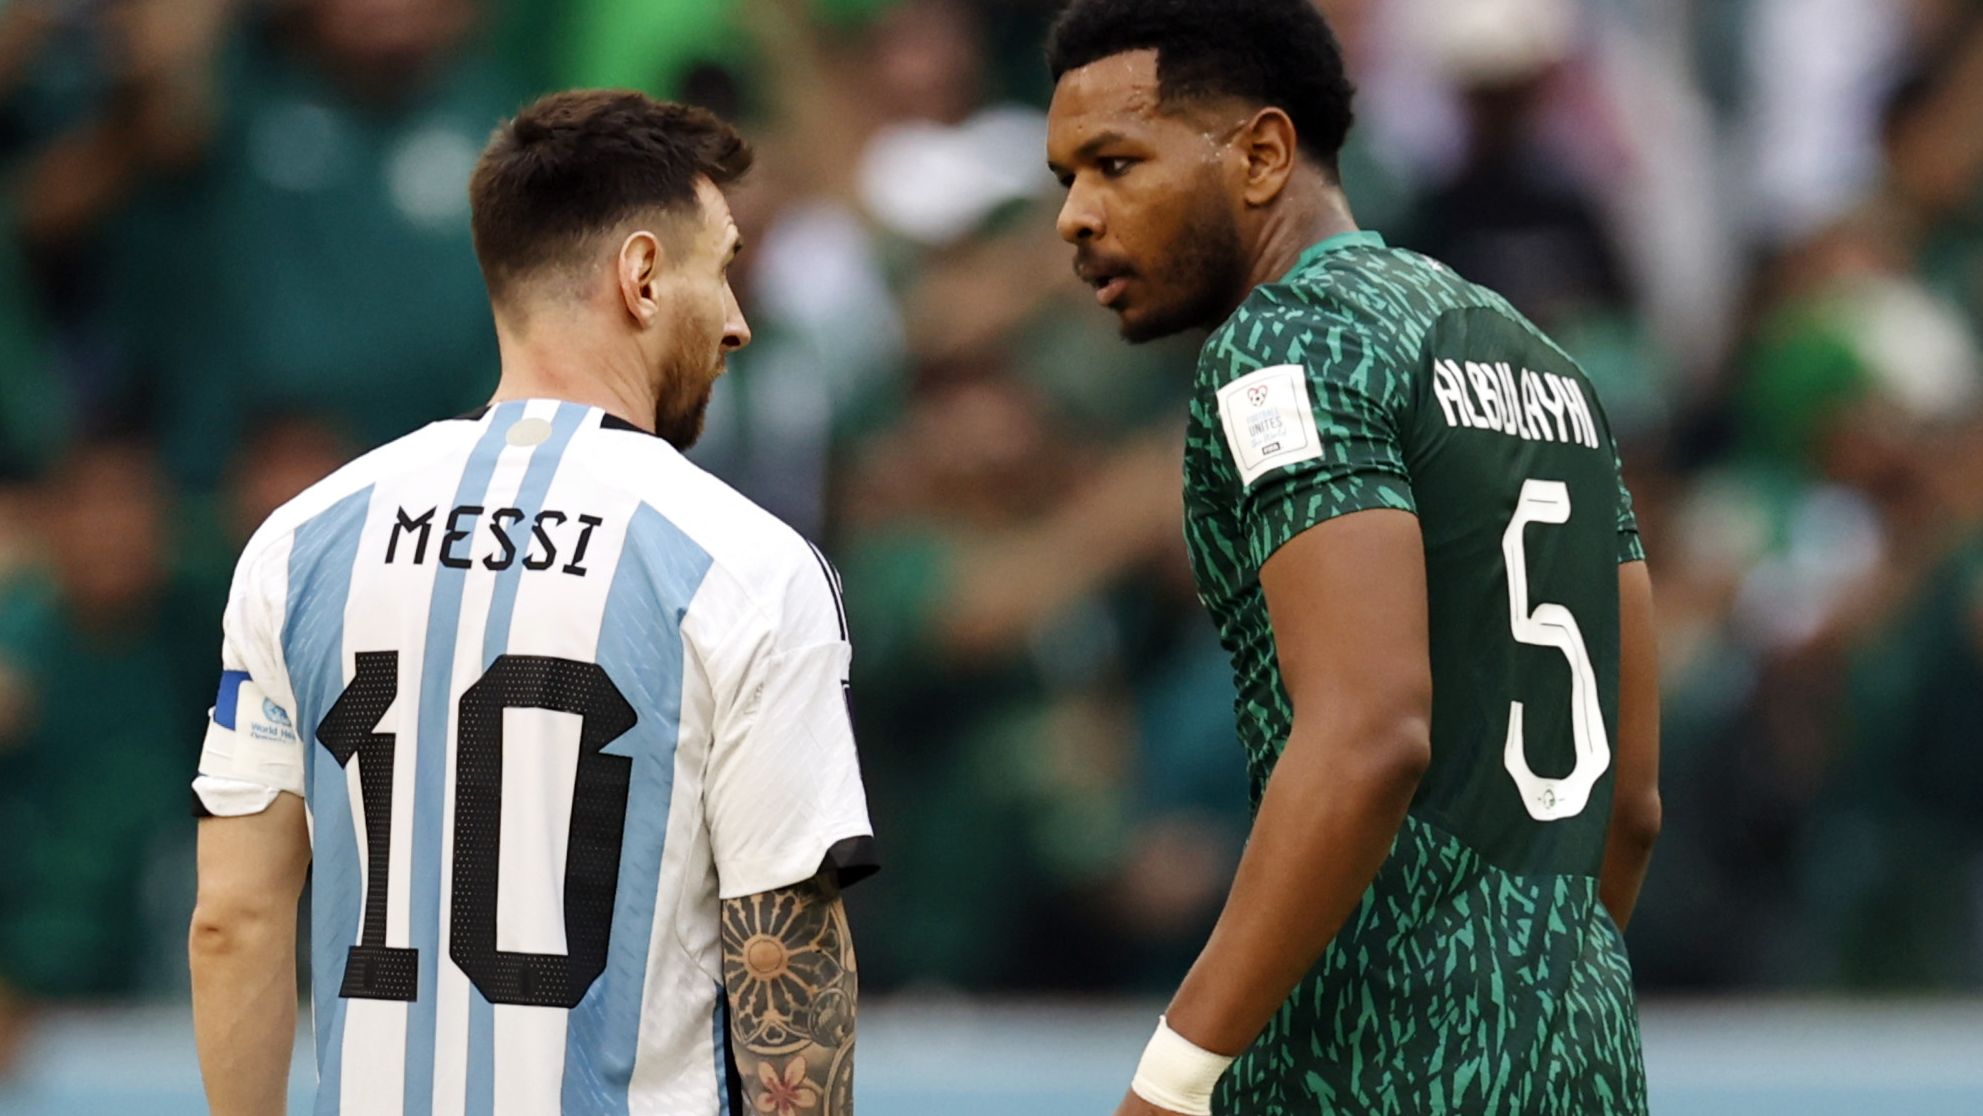 LUSAIL CITY - (l-r) Lionel Messi of Argentina, Ali Al Bulayhi of Saudi Arabia during the FIFA World Cup Qatar 2022 group C match between Argentina and Saudi Arabia at Lusail stadium on November 22, 2022 in Lusail City, Qatar. AP | Dutch Height | MAURICE OF STONE (Photo by ANP via Getty Images)